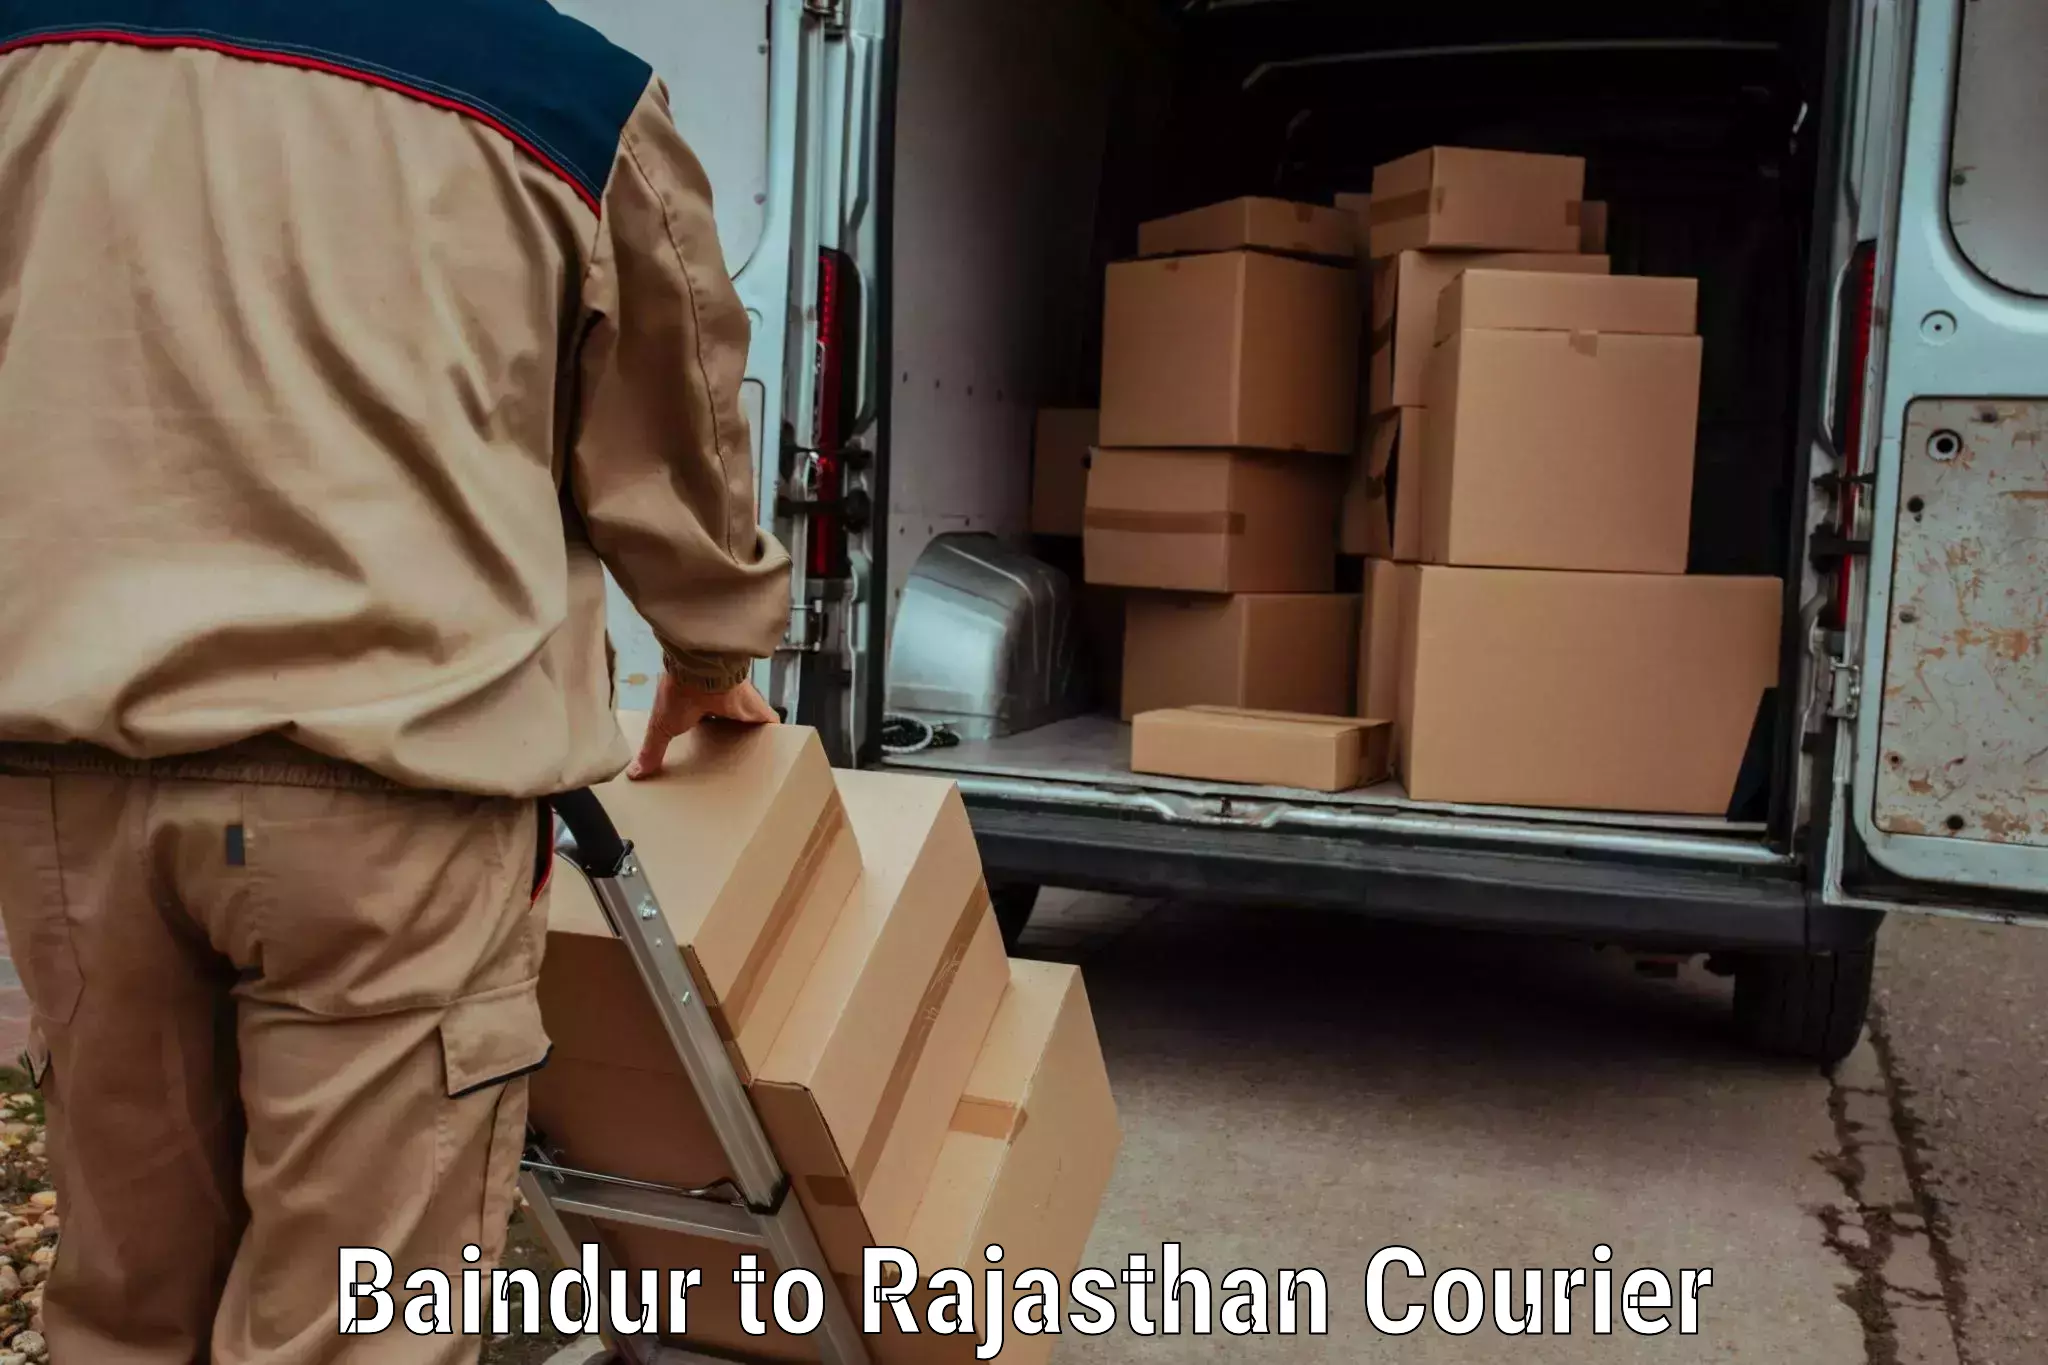 Overnight delivery services Baindur to Kalwar